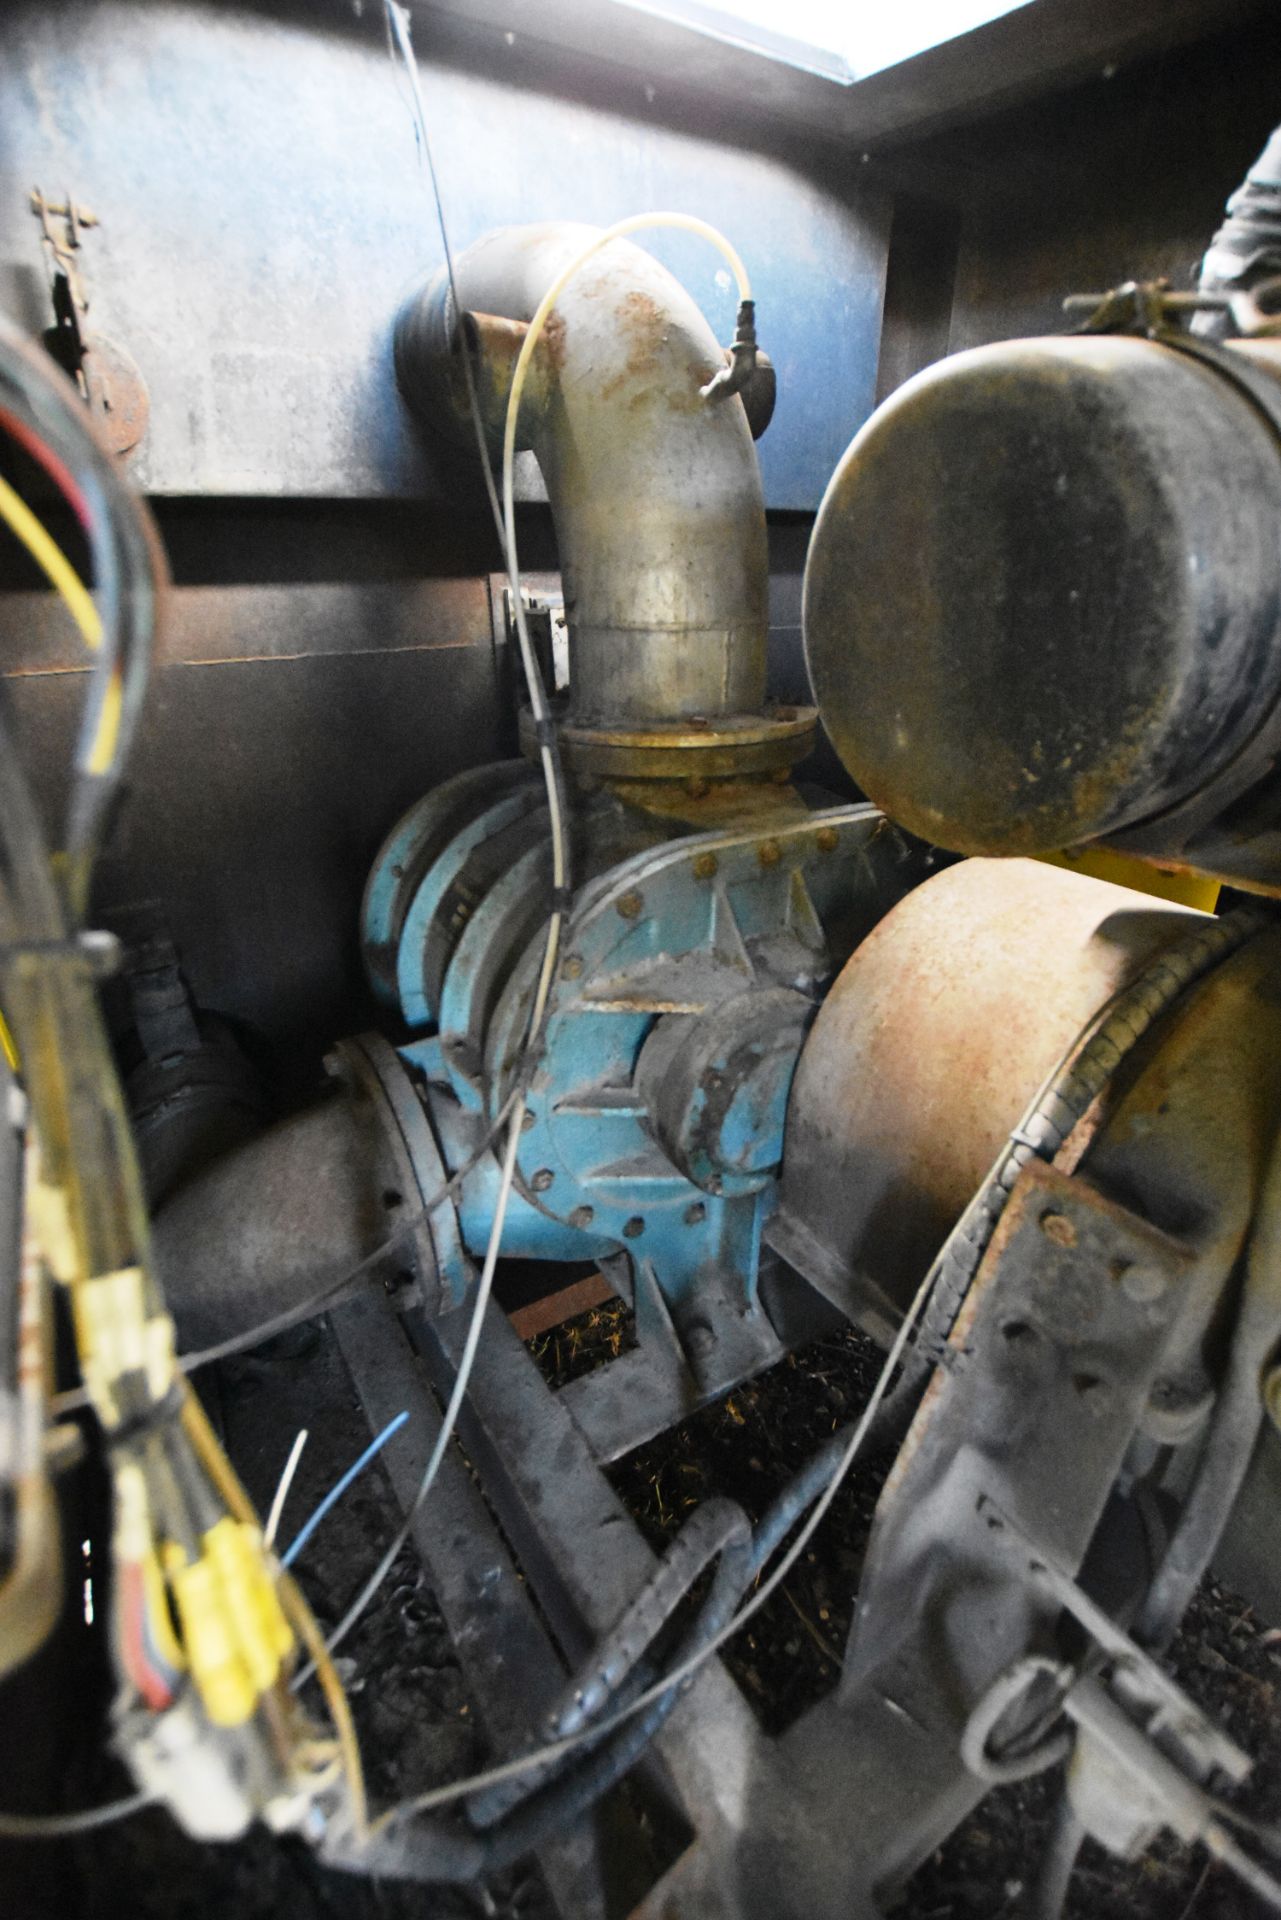 Vactor VACUUM UNIT, (SV379), fitted six cylinder diesel engine, Holmes blower dust filter socks - Image 8 of 10